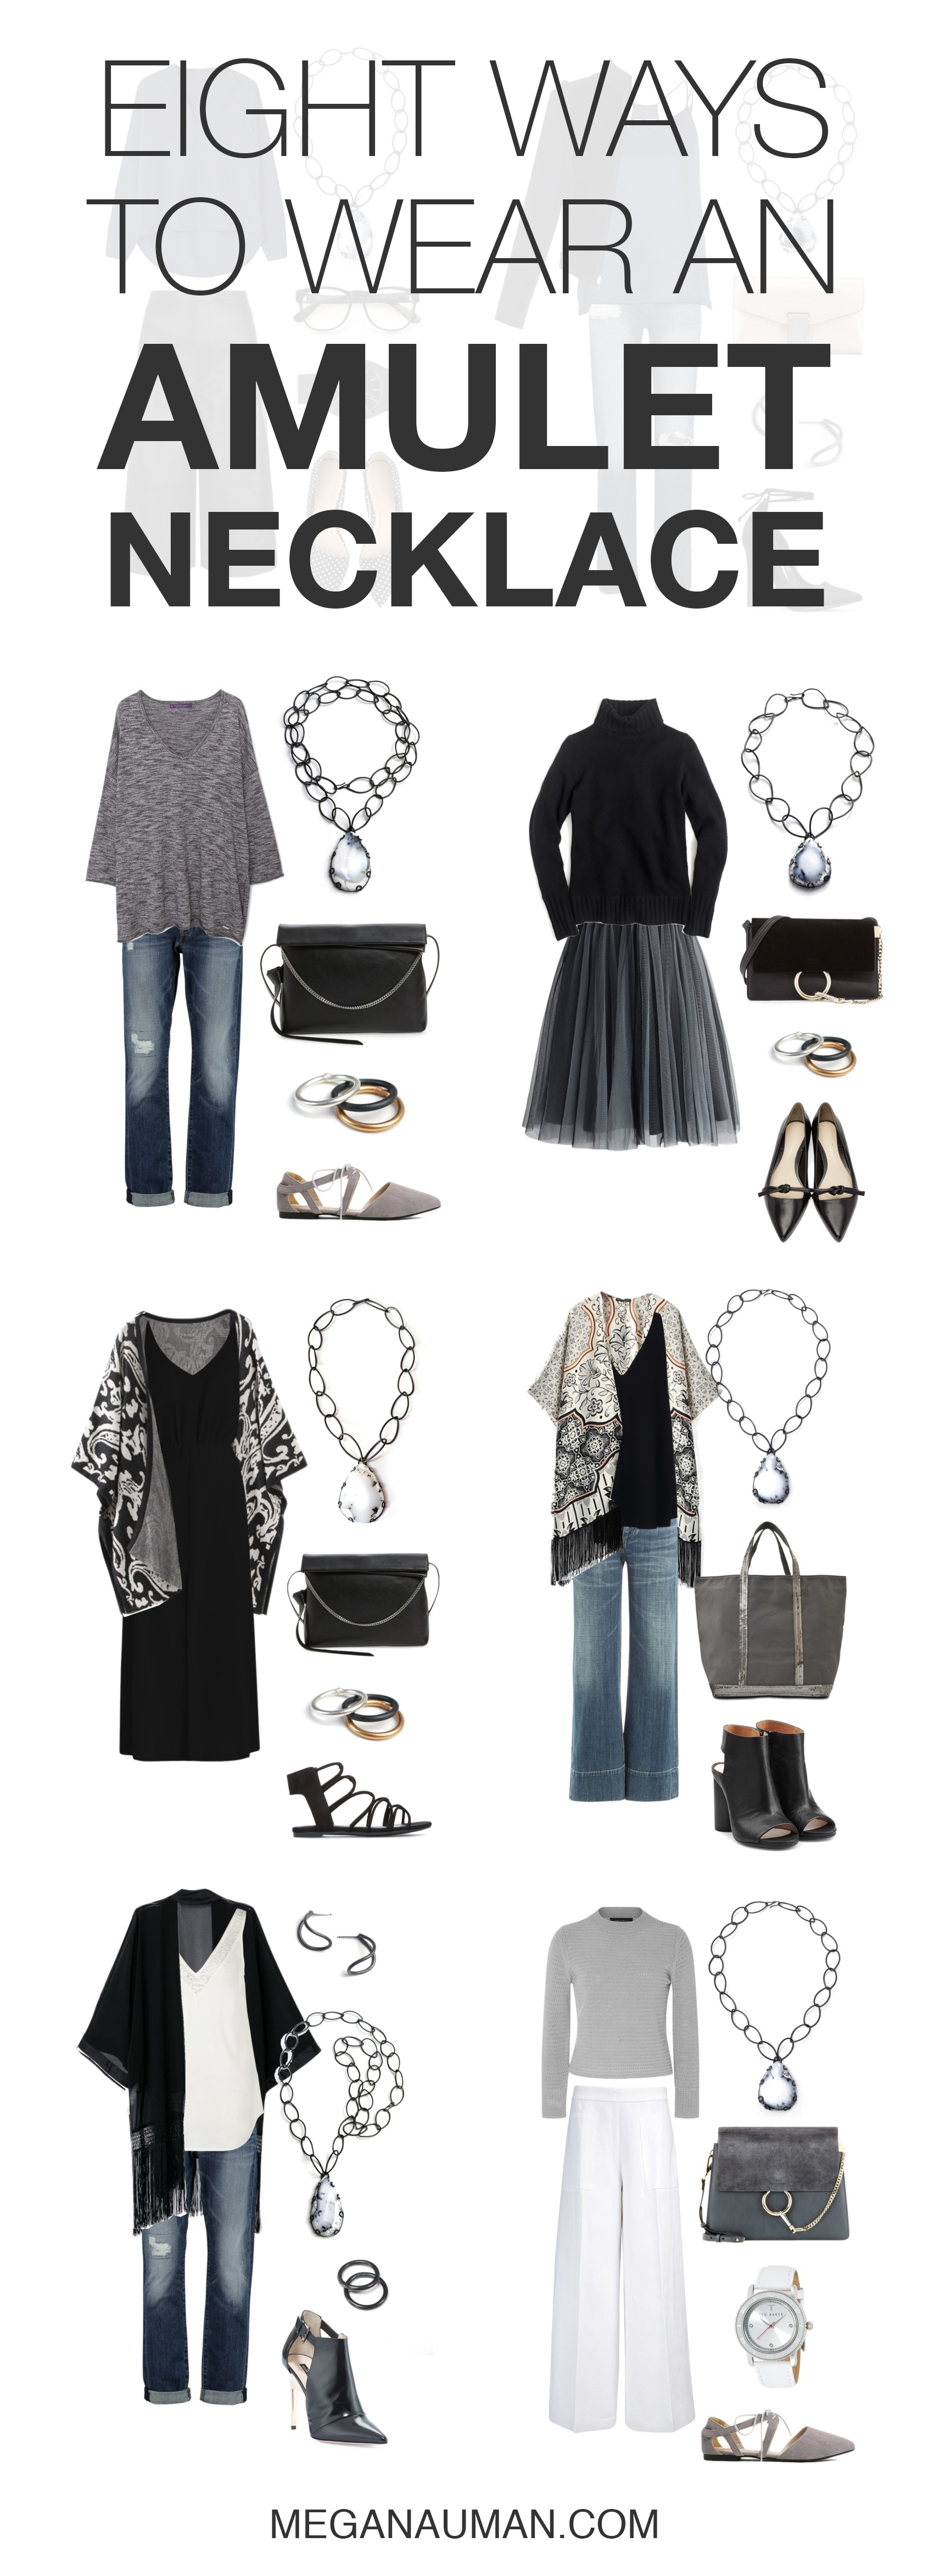 8 ways to wear an amulet-style necklace // click through for outfit ideas